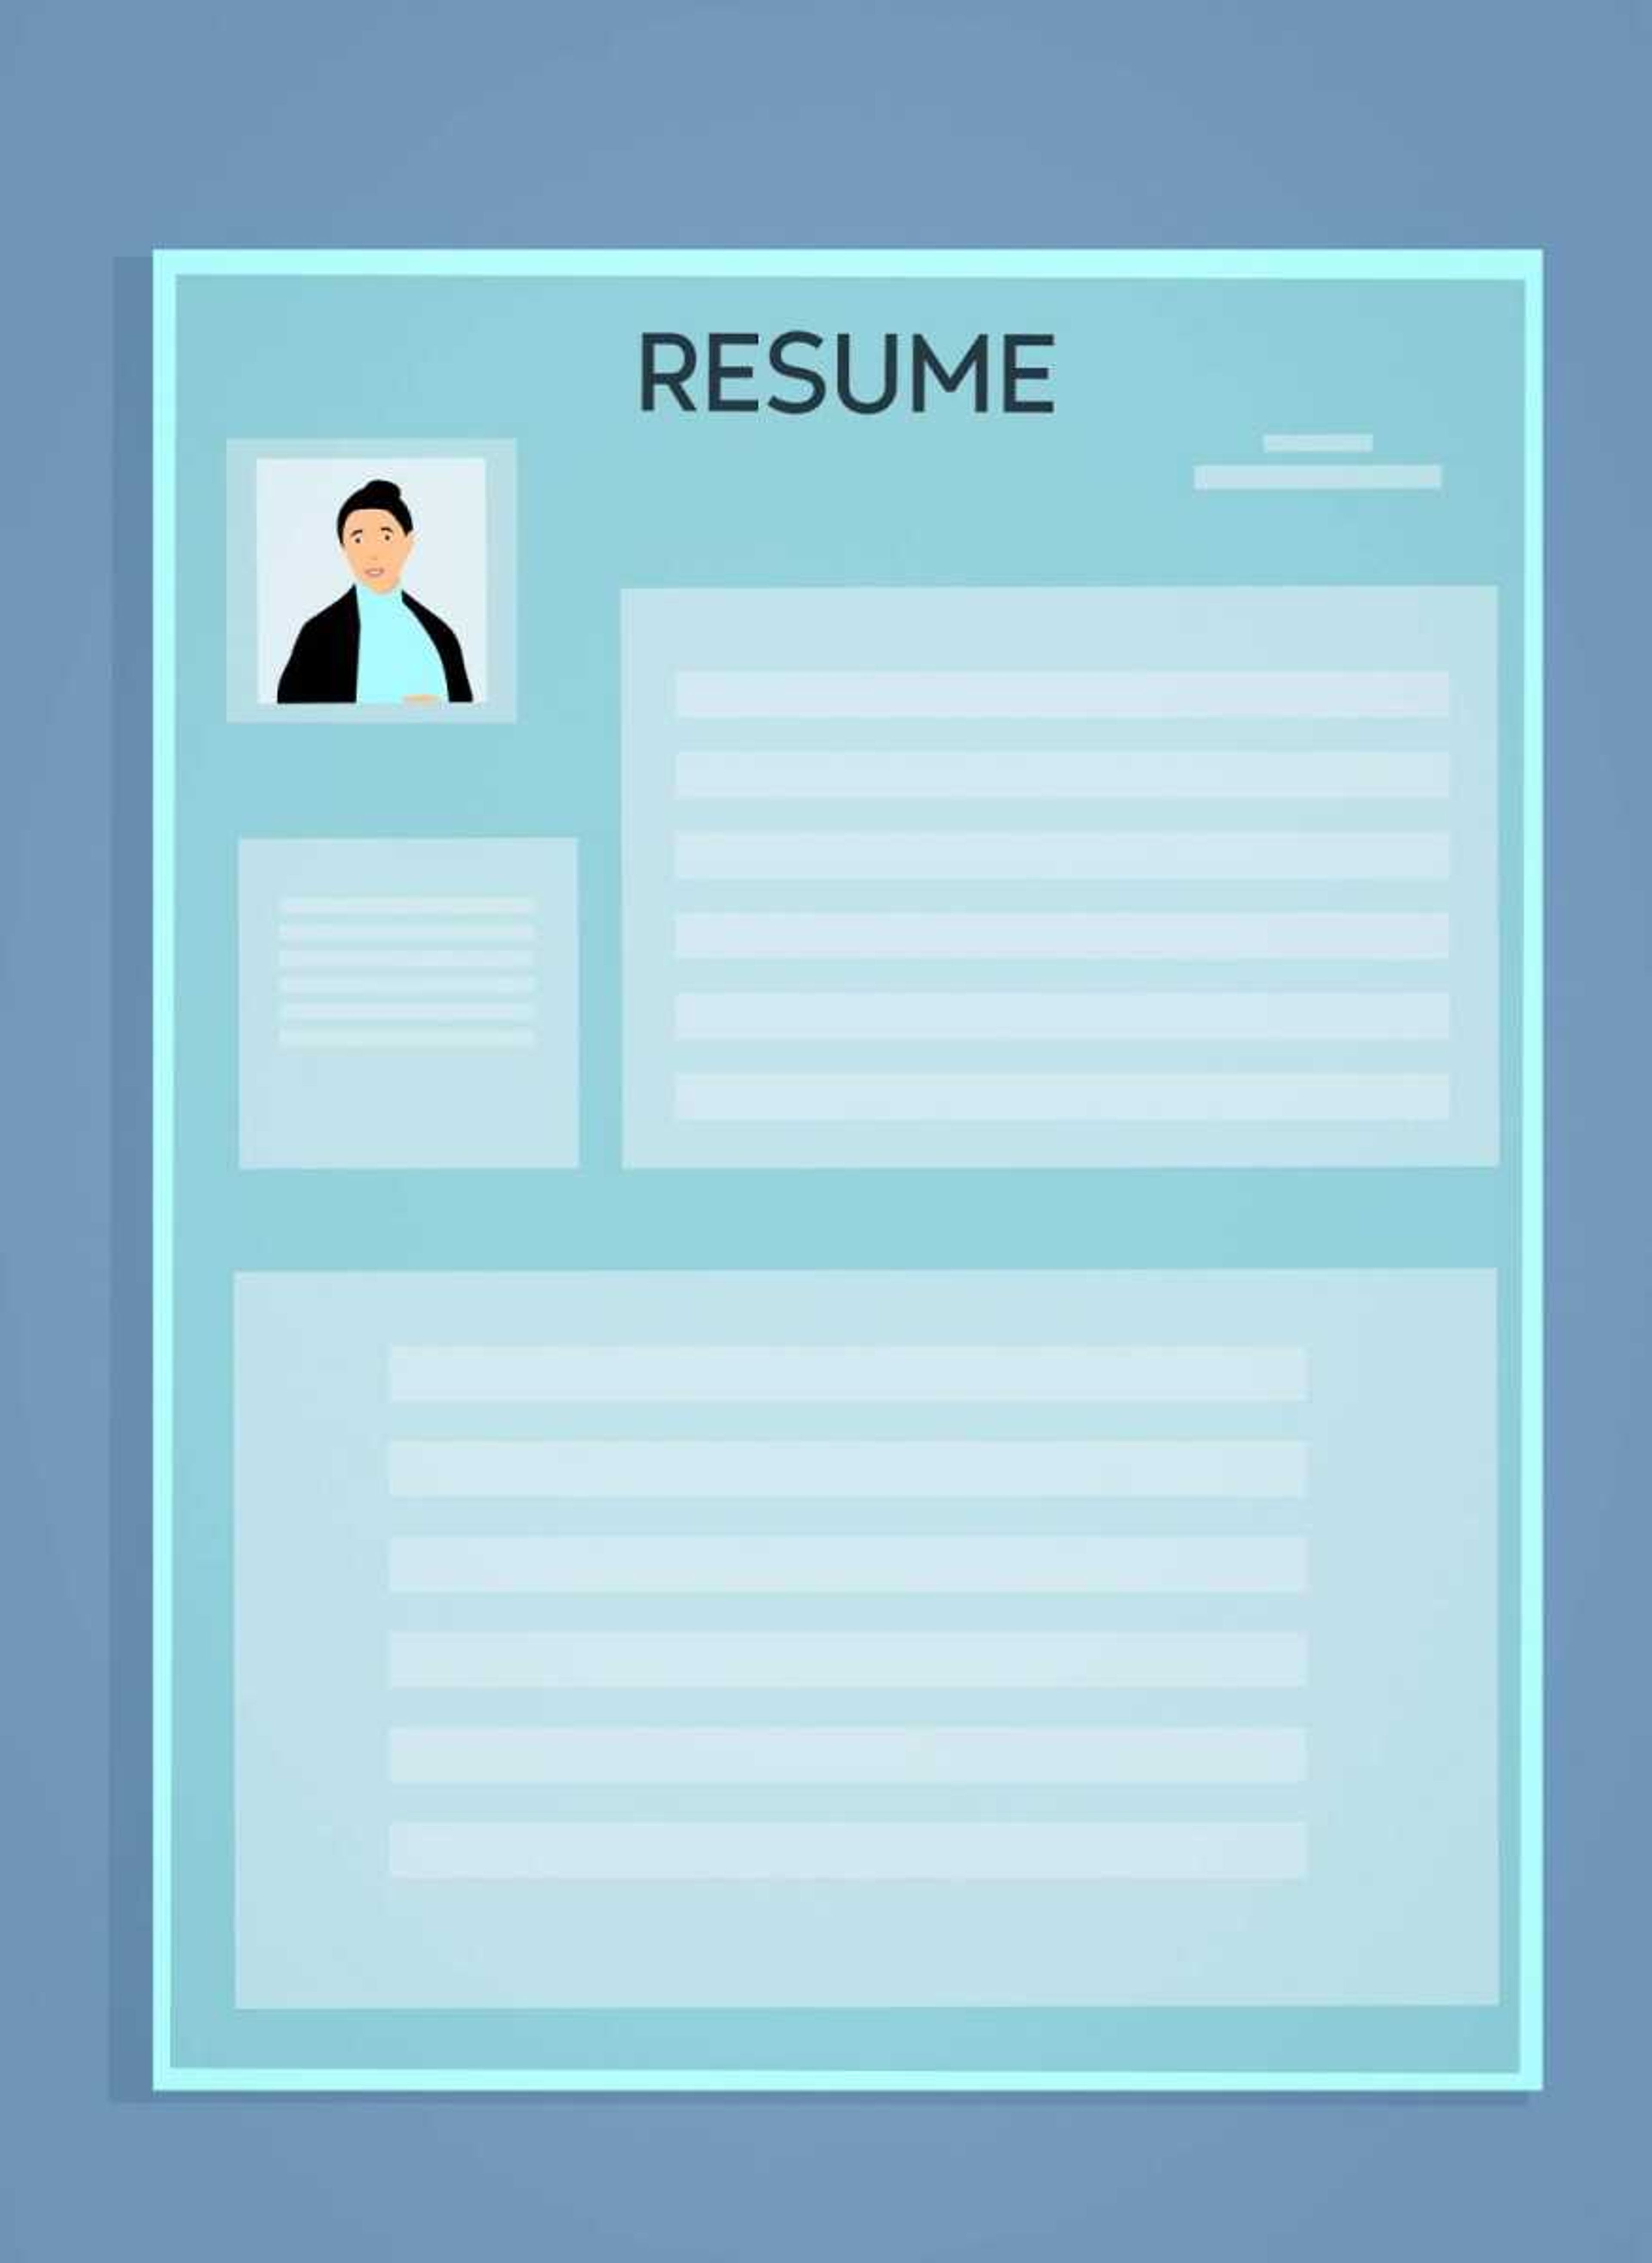 Ready Your Resume event offers advice on April 23